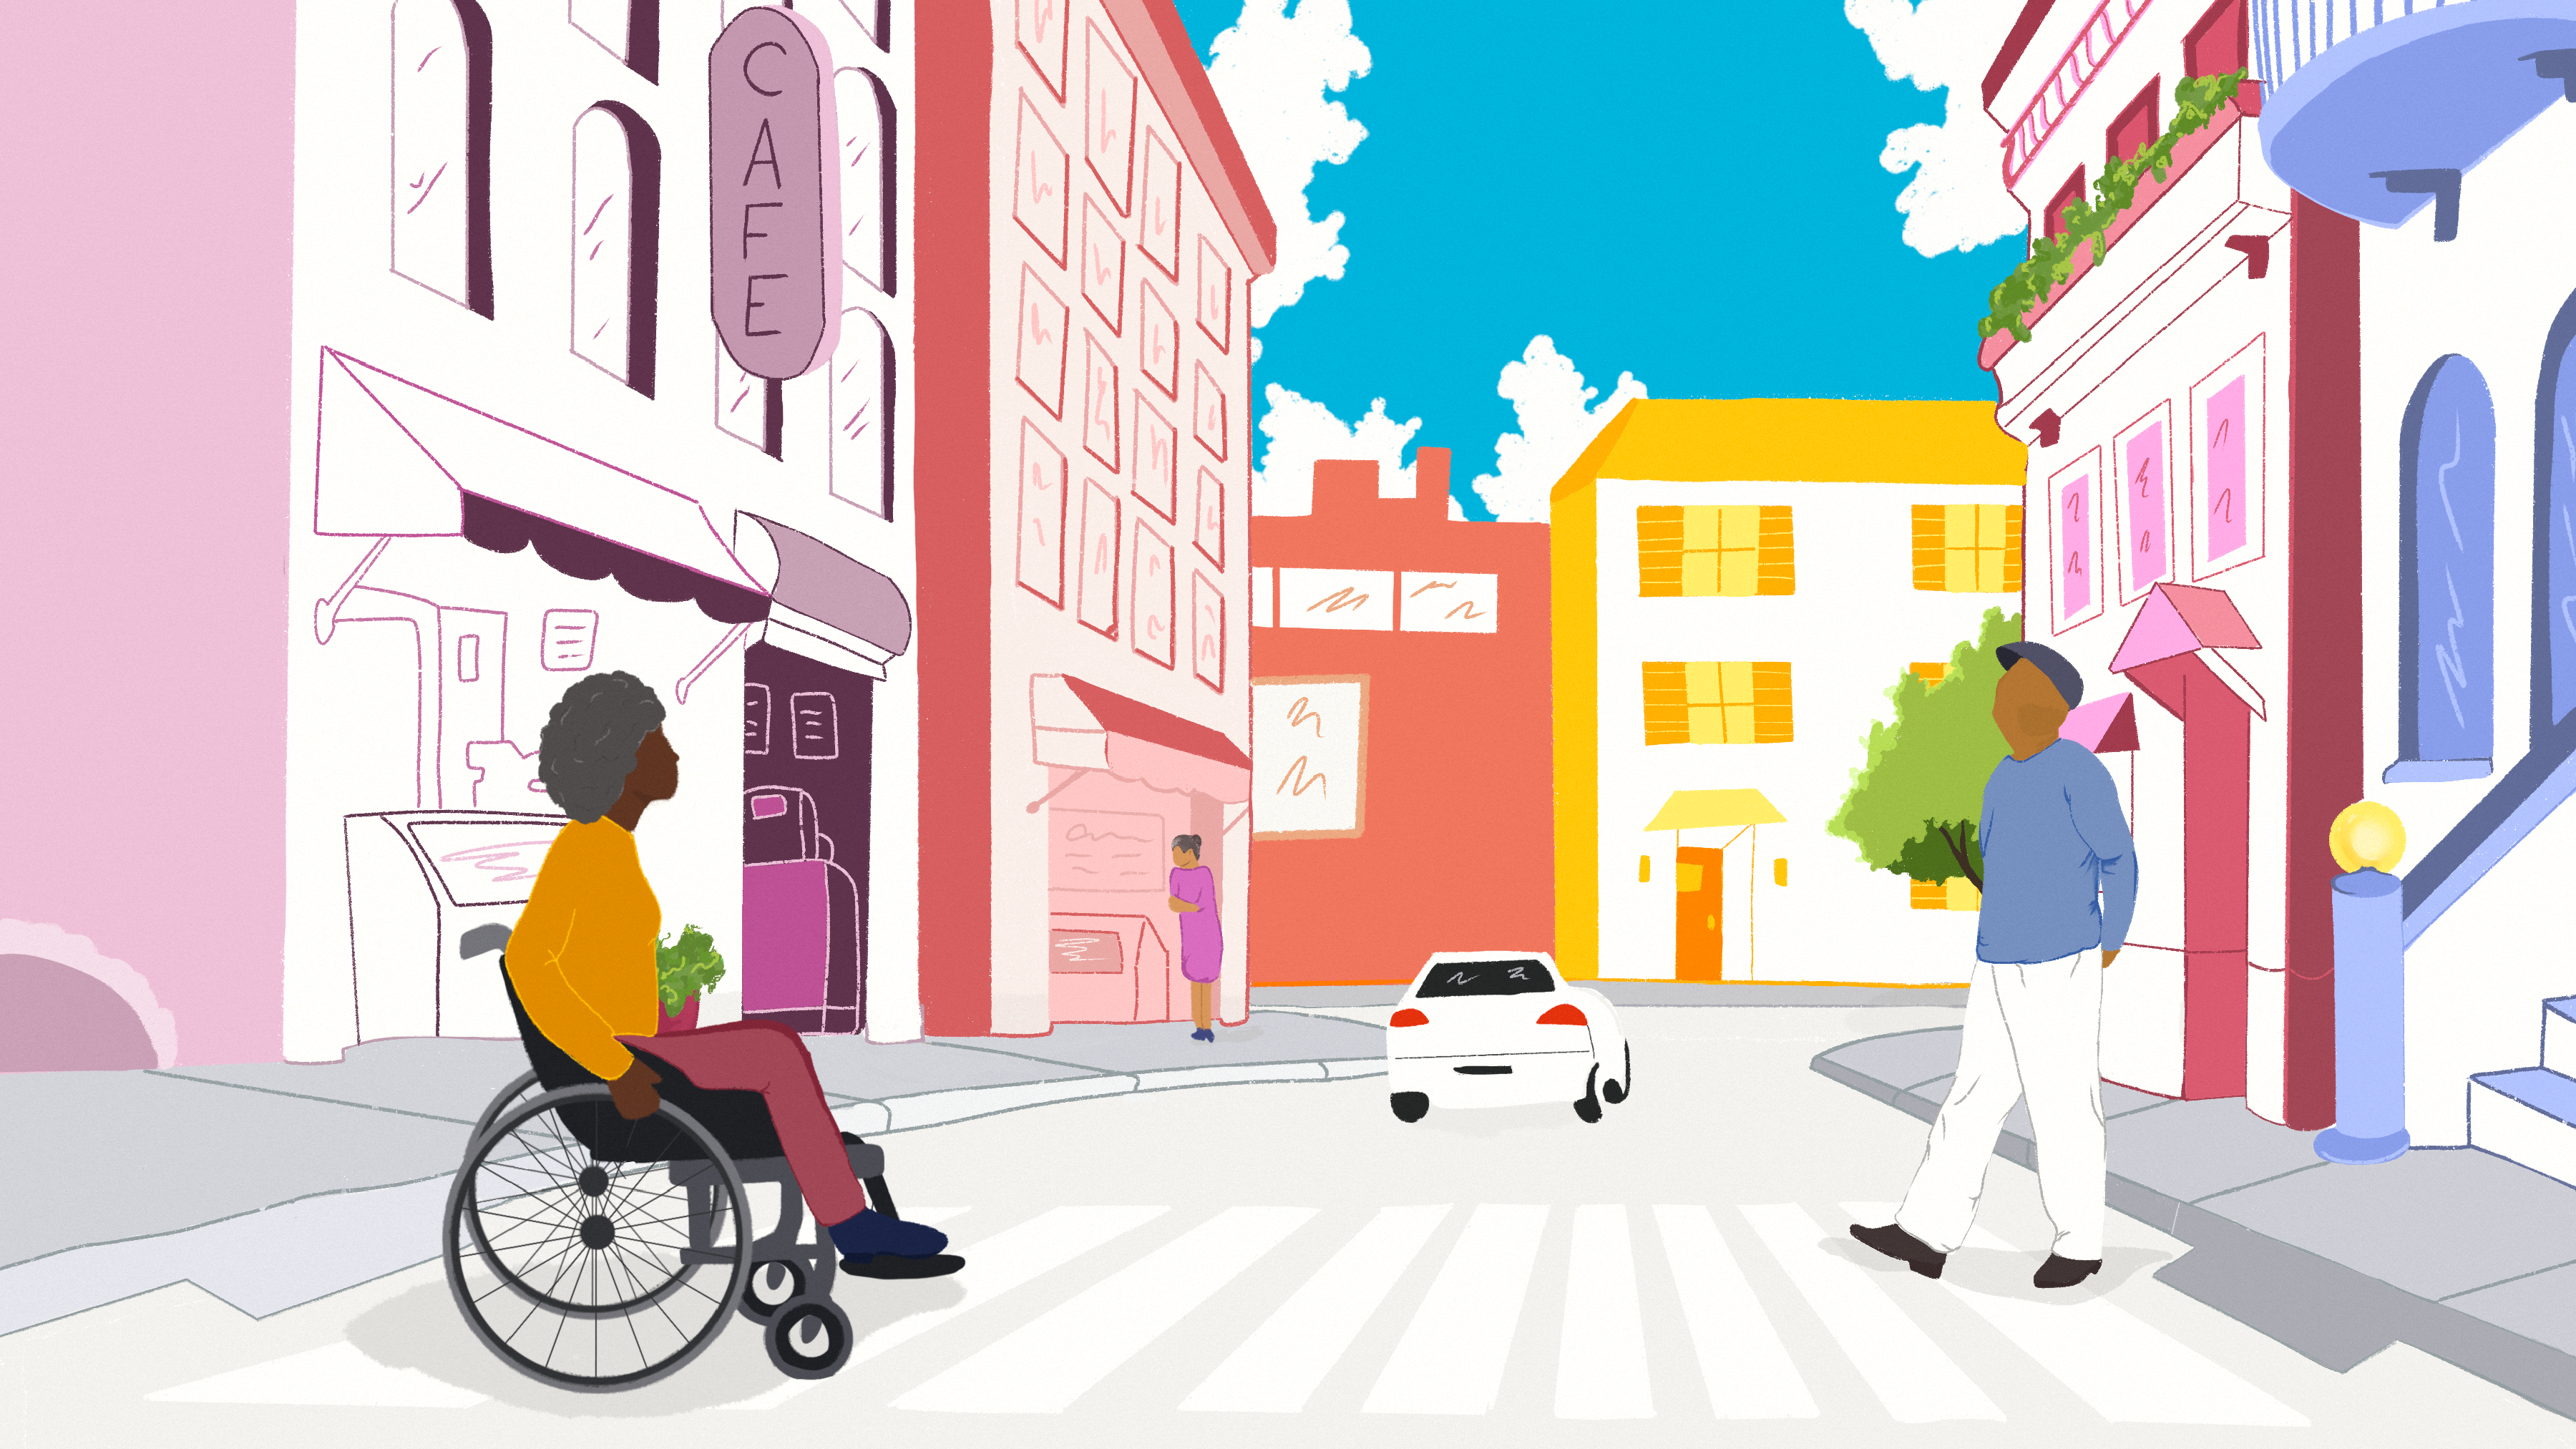 Colorful city scene with retirees crossing the street, one gazing at the sky, another in a wheelchair, while a woman shops at a store in the background.